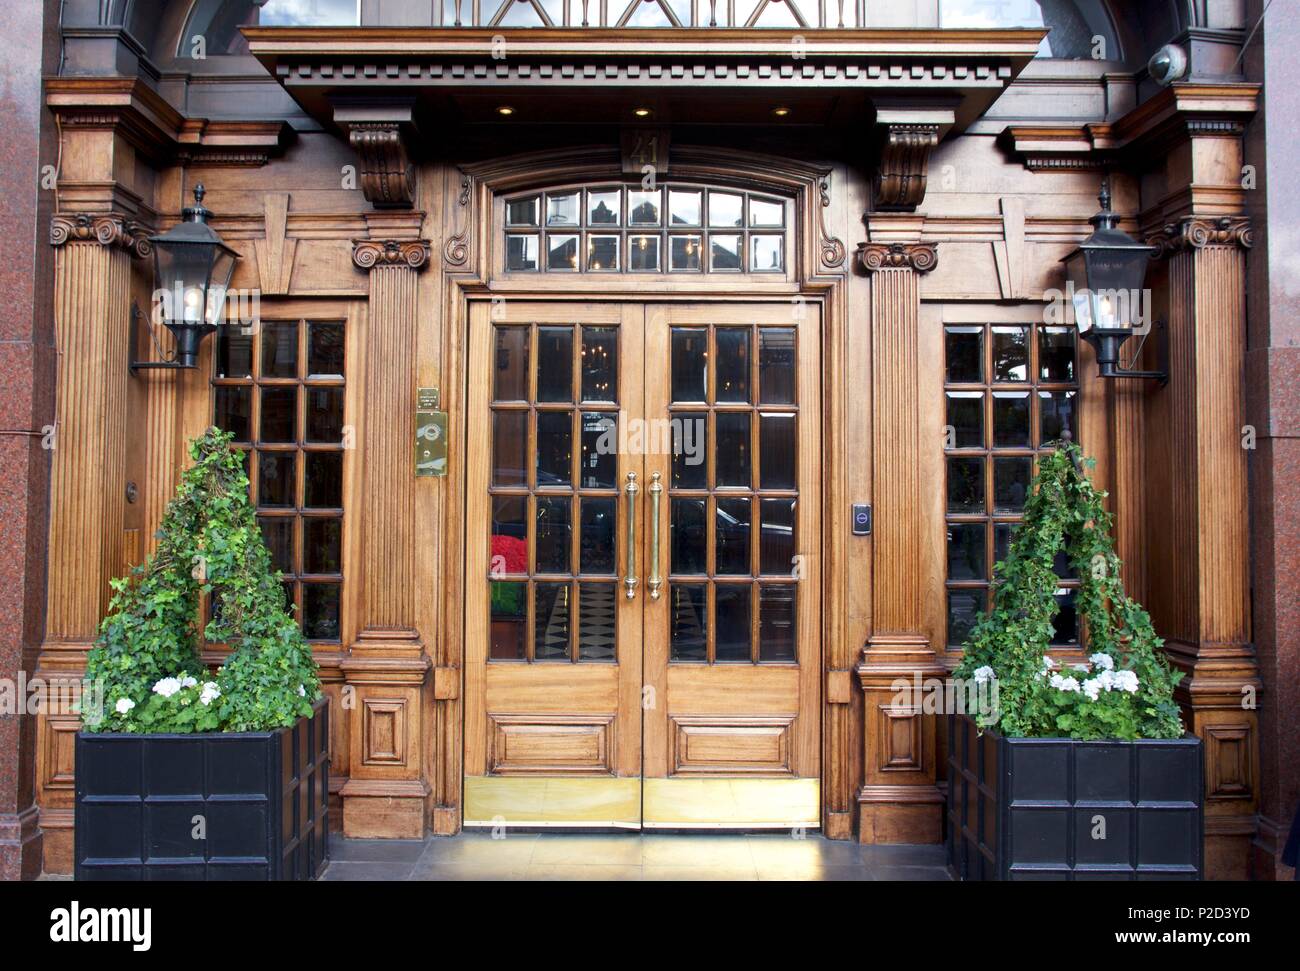 The entrance for 5 star, luxury boutique Hotel 41 on Buckingham Palace Road,Victoria,London which is part of the Red Carnation Hotel Collection Stock Photo